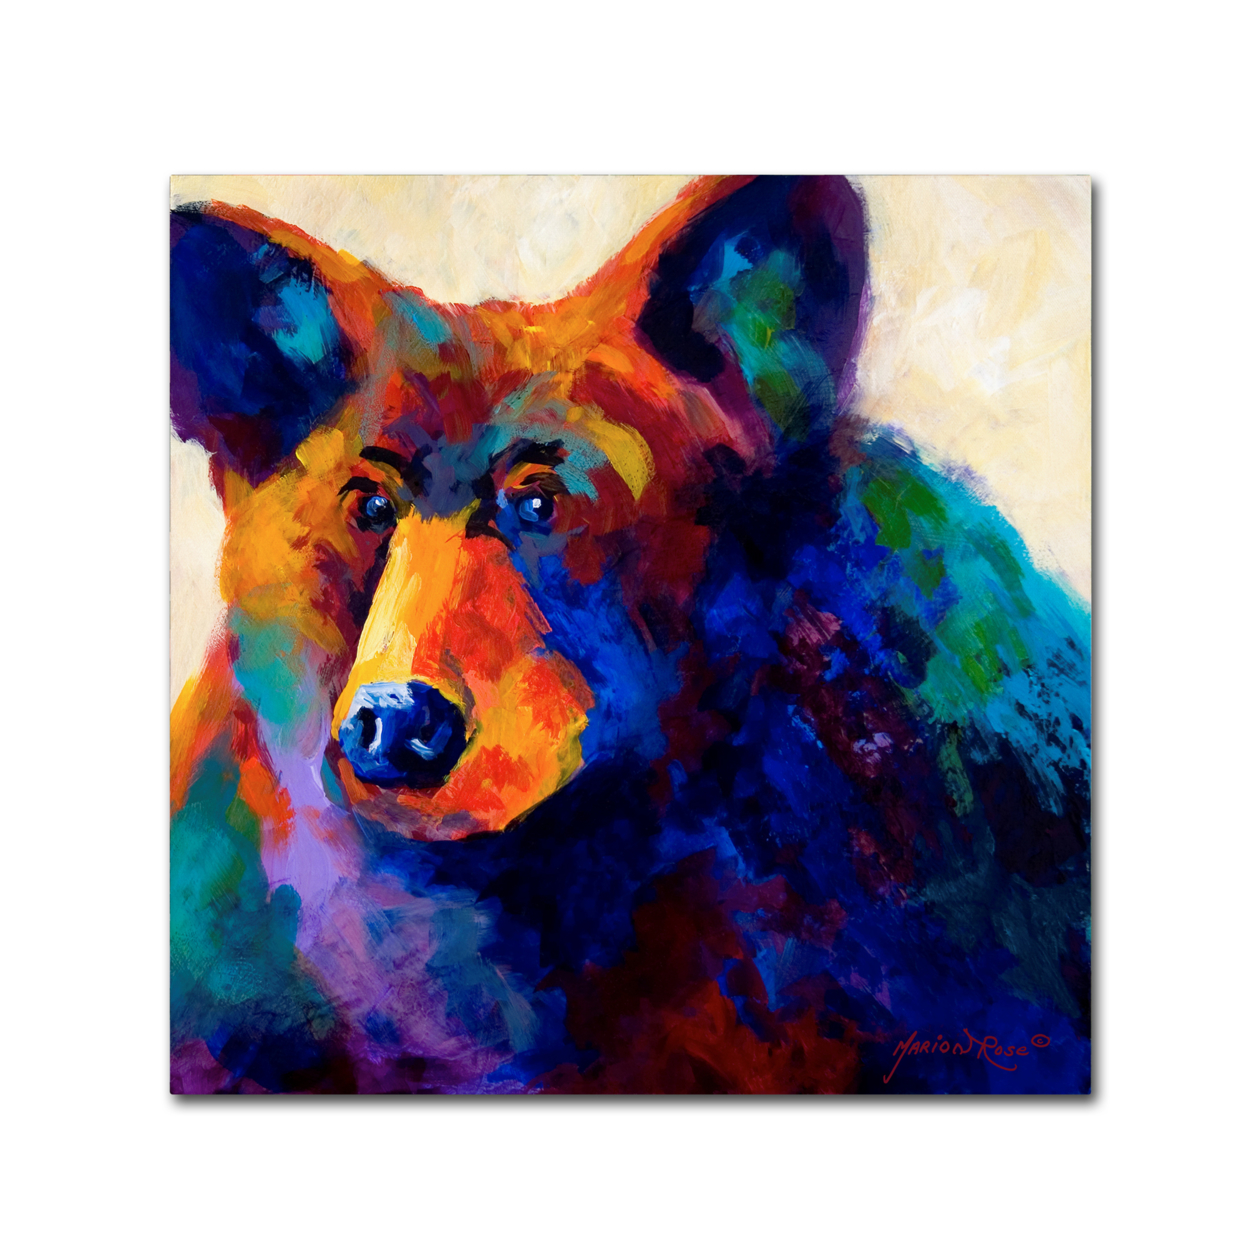 Marion Rose 'Beary Nice' Ready To Hang Canvas Art 24 X 24 Inches Made In USA